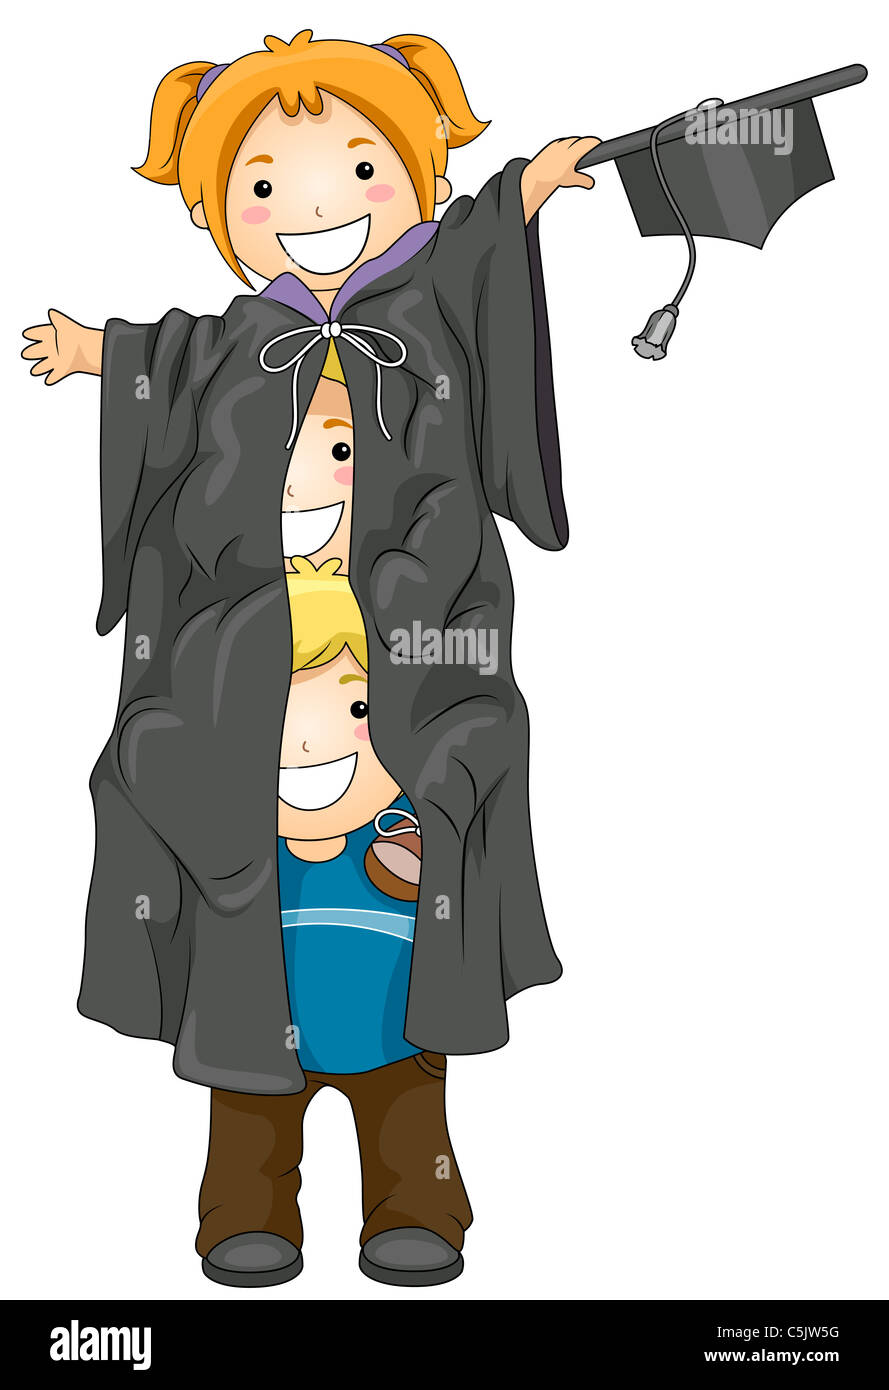 Illustration Featuring Kids Piled One on Top of the Other and Hiding Behind a Toga Stock Photo